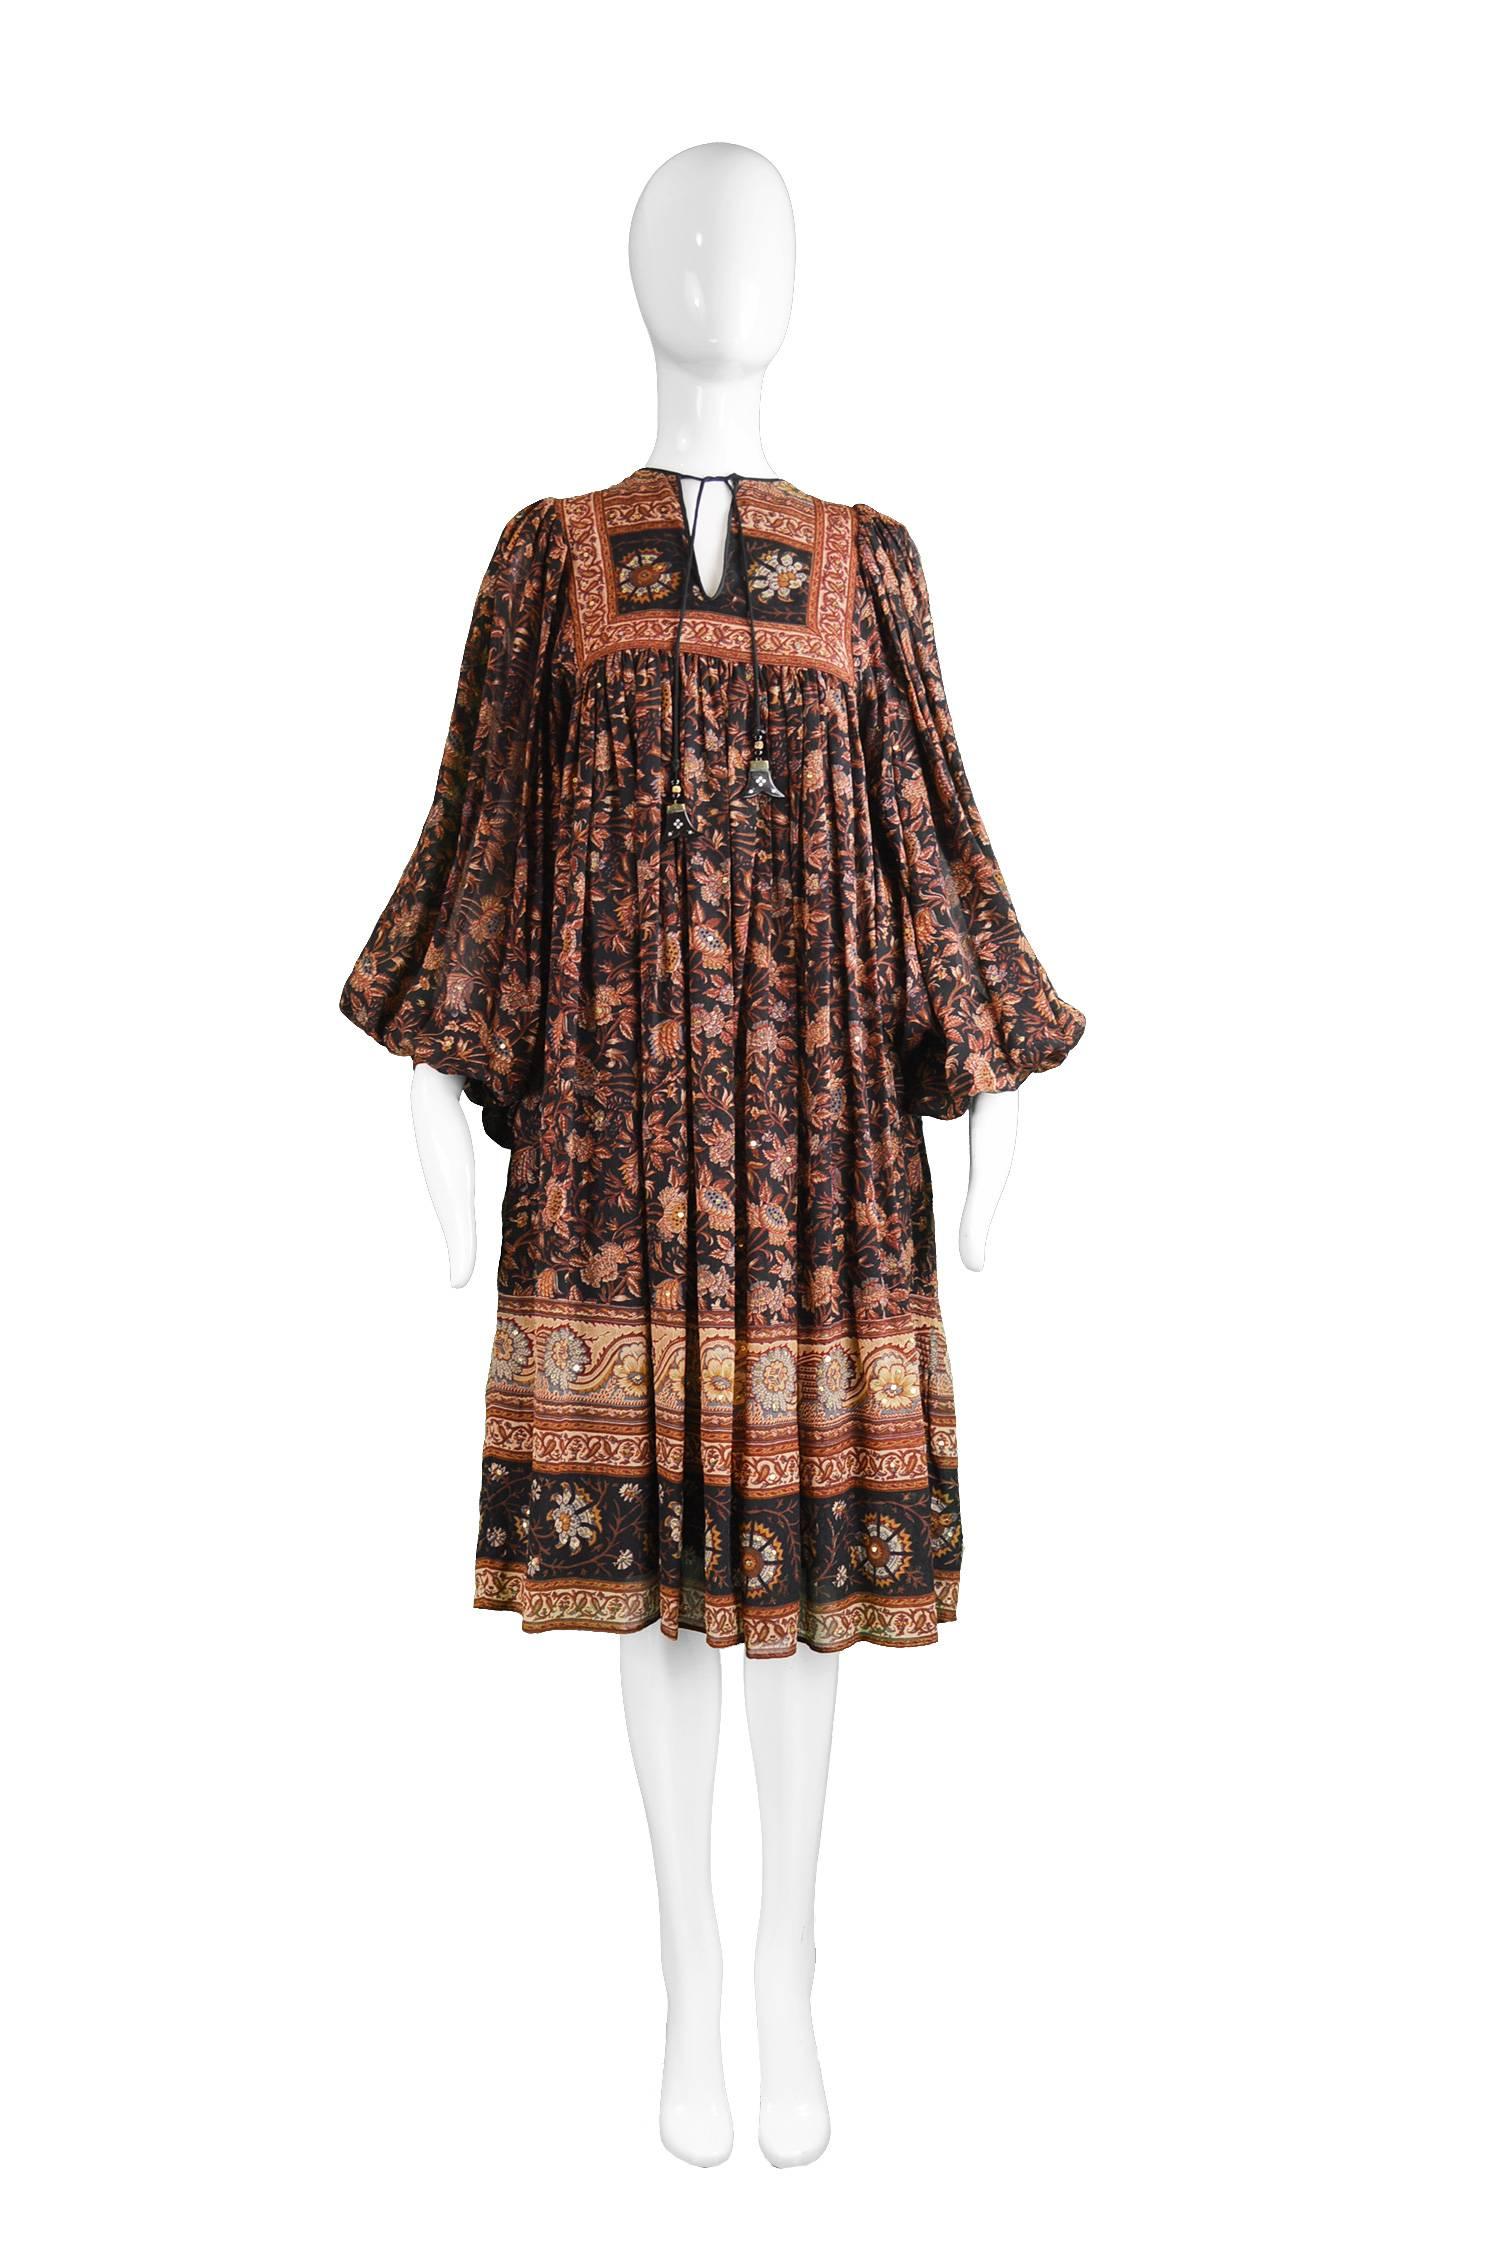 Jean Varon & Ritu Kumar Indian Silk Vintage Balloon Sleeve Dress, 1970s

Estimated Size: Women's Small to Medium due to loose, flowing fit as with many of these Indian dresses. Please check measurements.
Bust - More dependant on waist due to